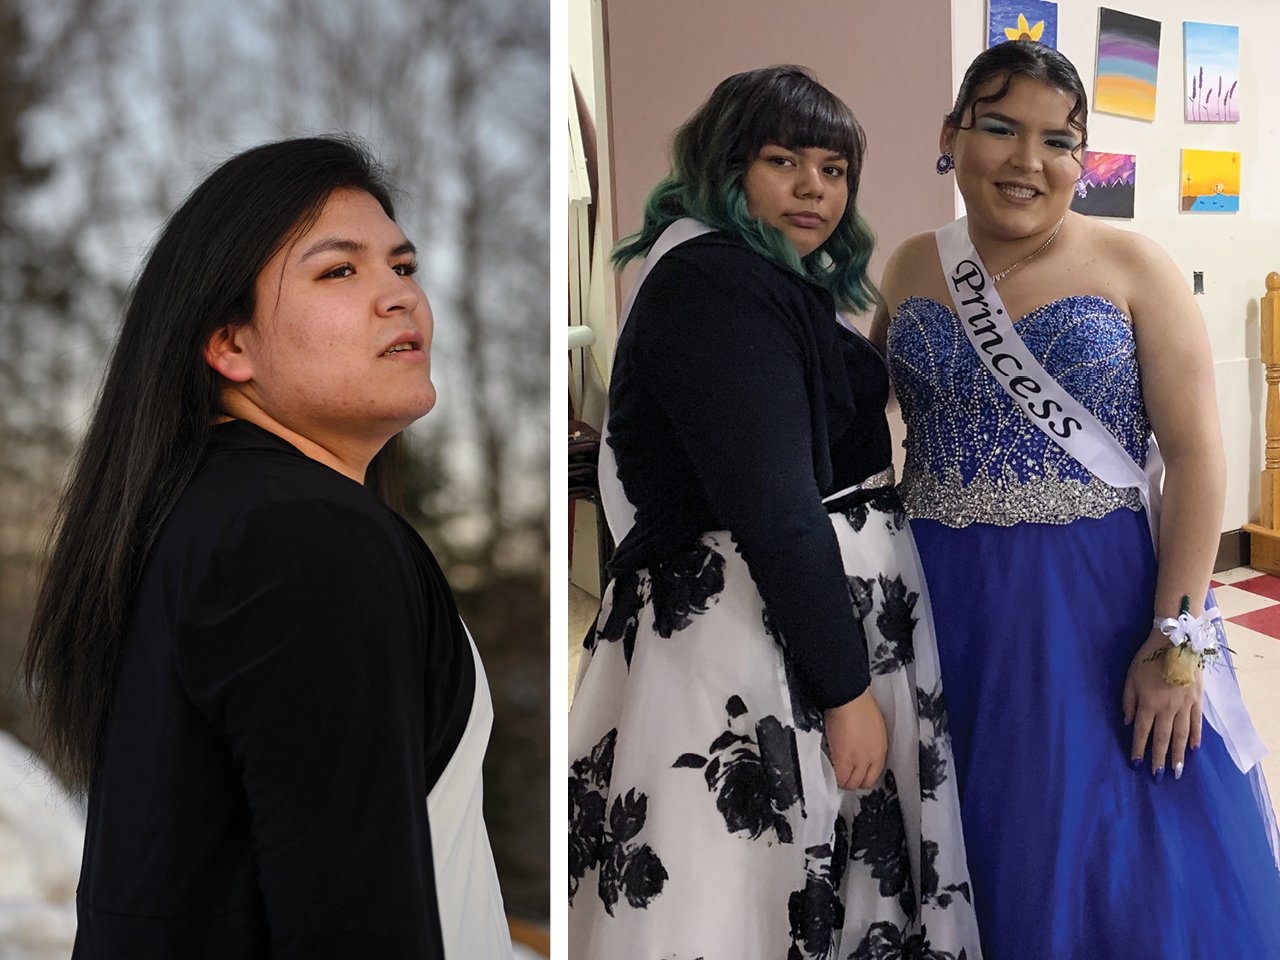 A photo of an Indigenous teen girl, a separate photo of two Indigenous teen girls in formal dresses.